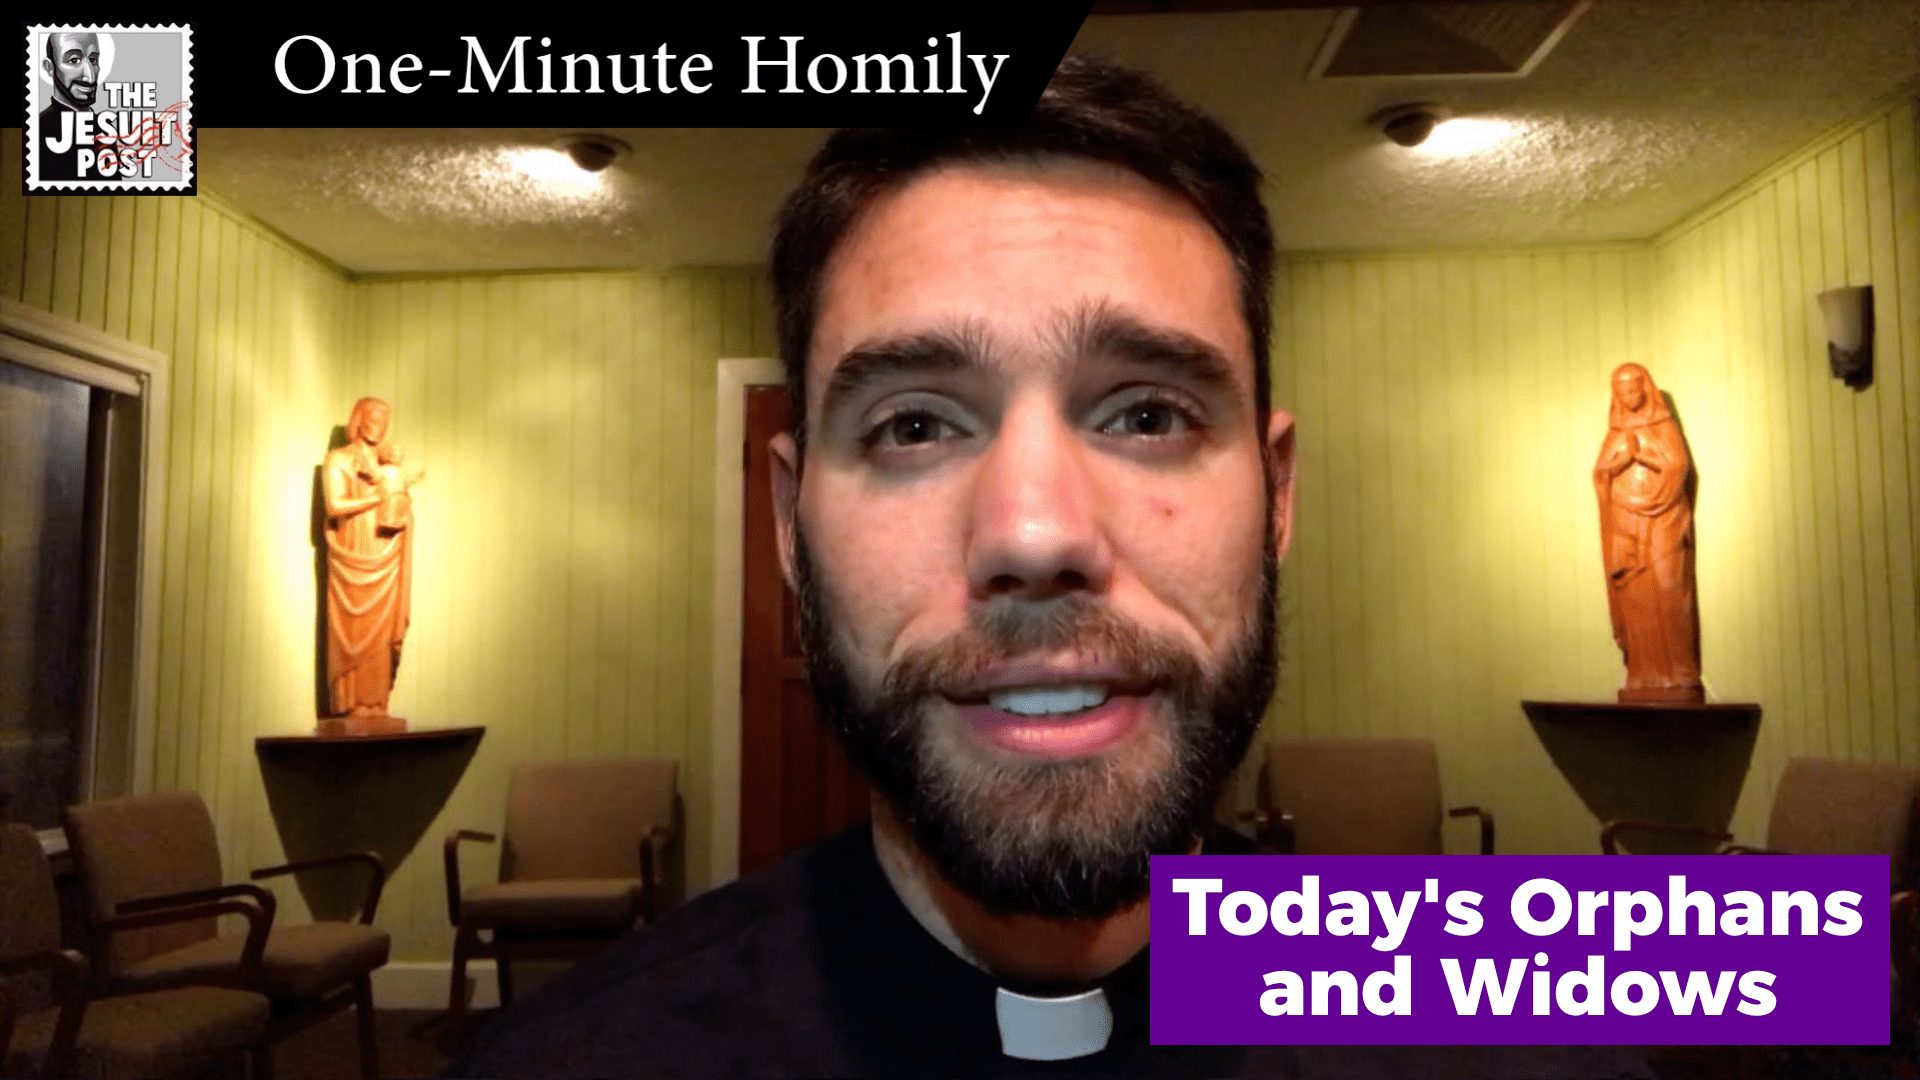 One-Minute Homily: “Today’s Orphans and Widows”